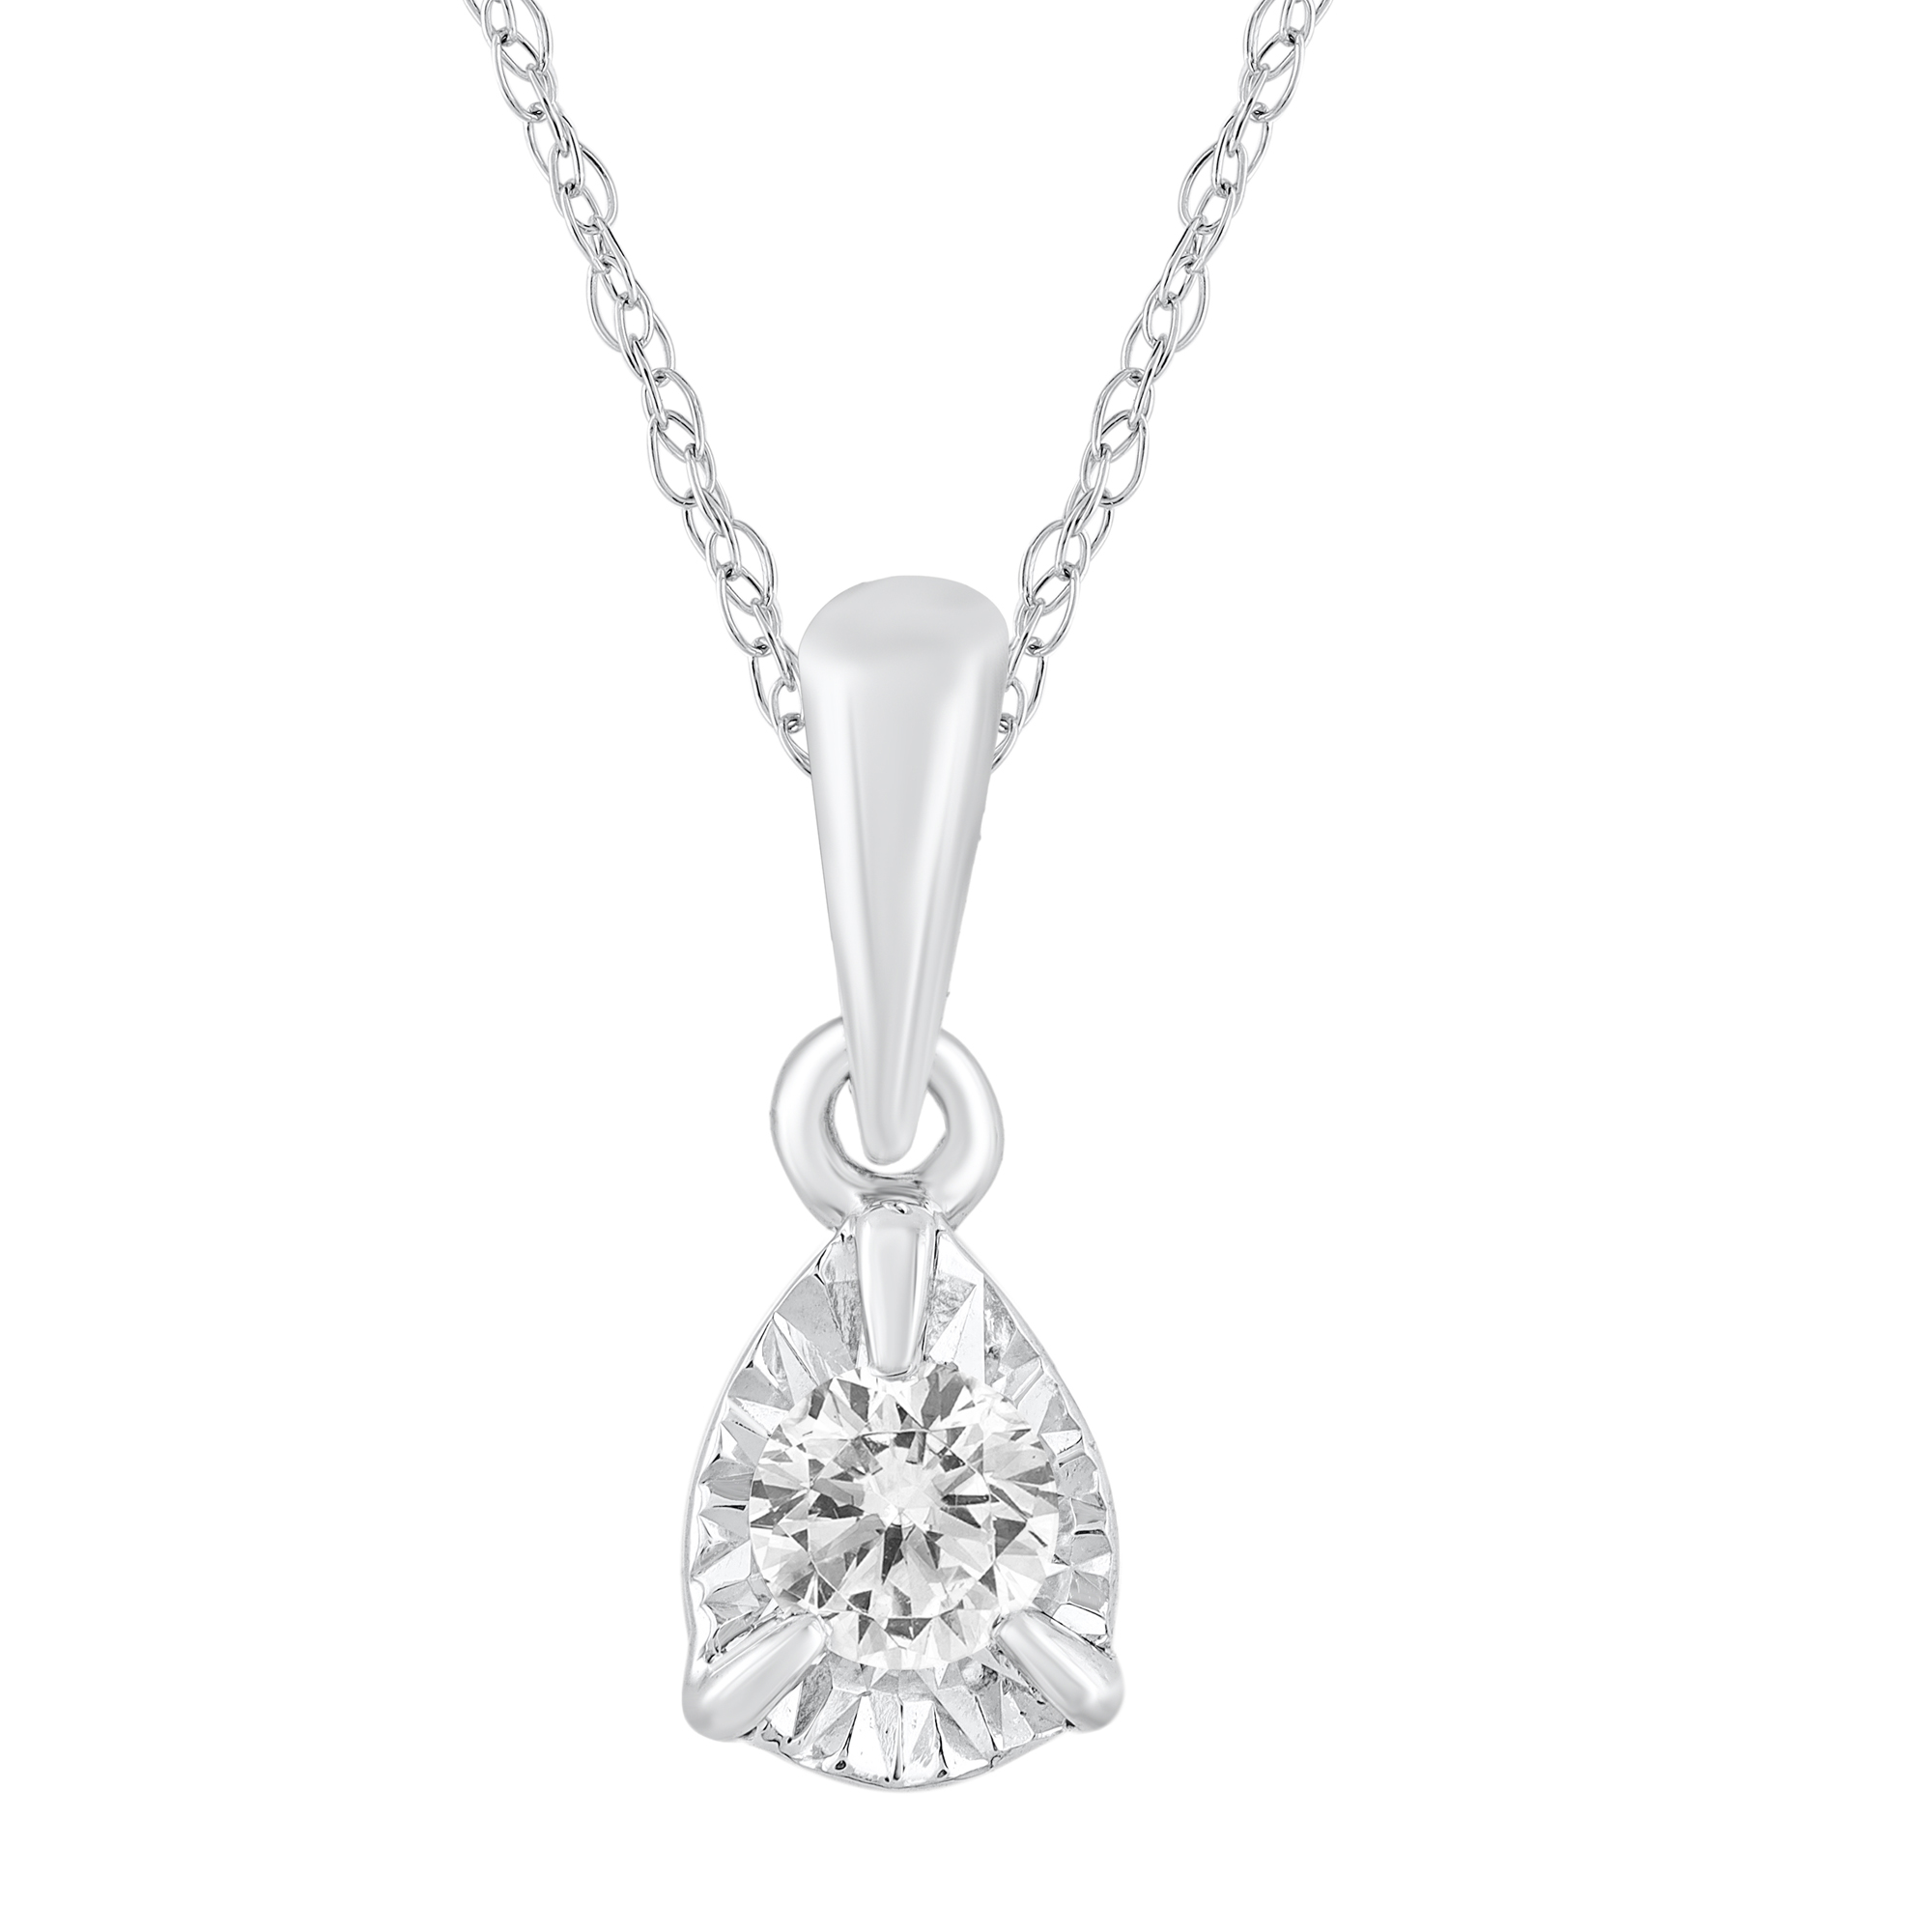 Louisville Extra Large (1 Inch) Pendant (10k White Gold)